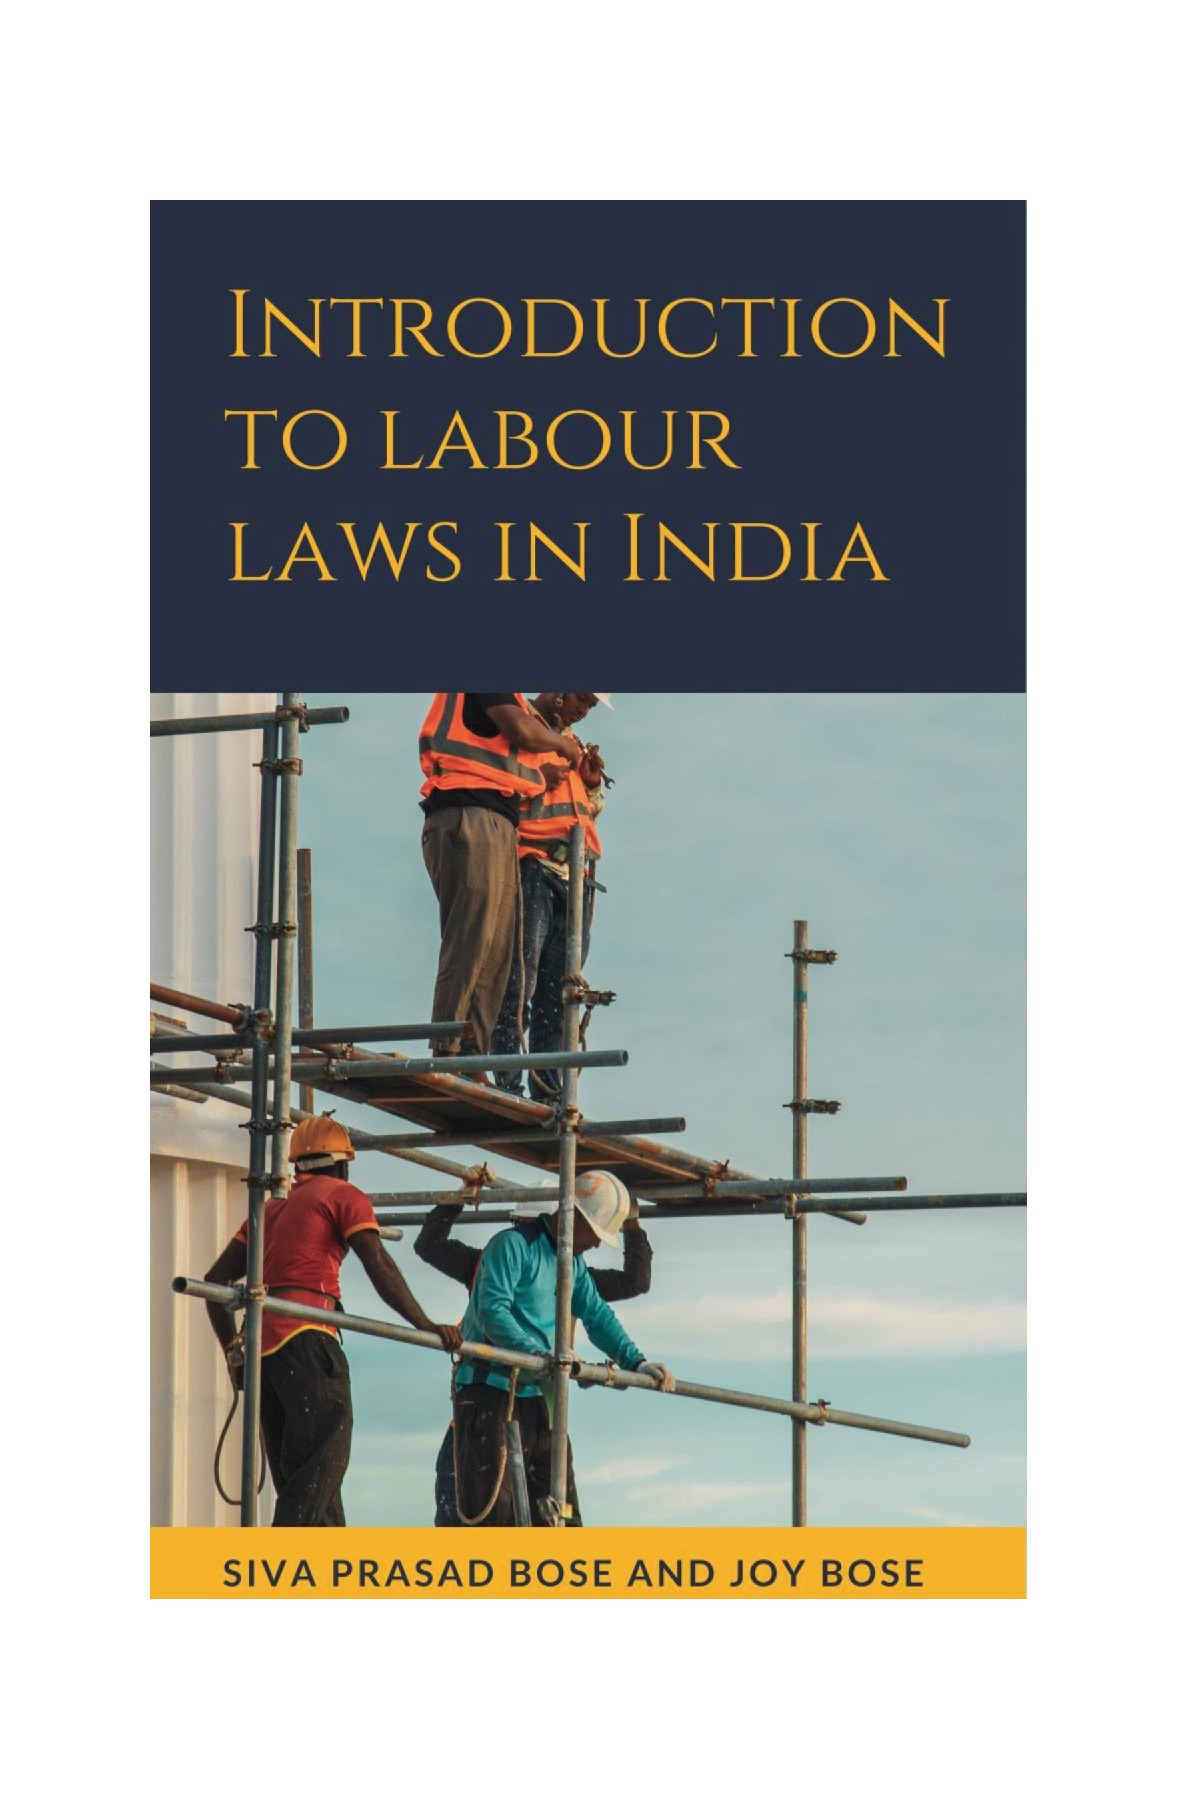 assignment on labour law in india